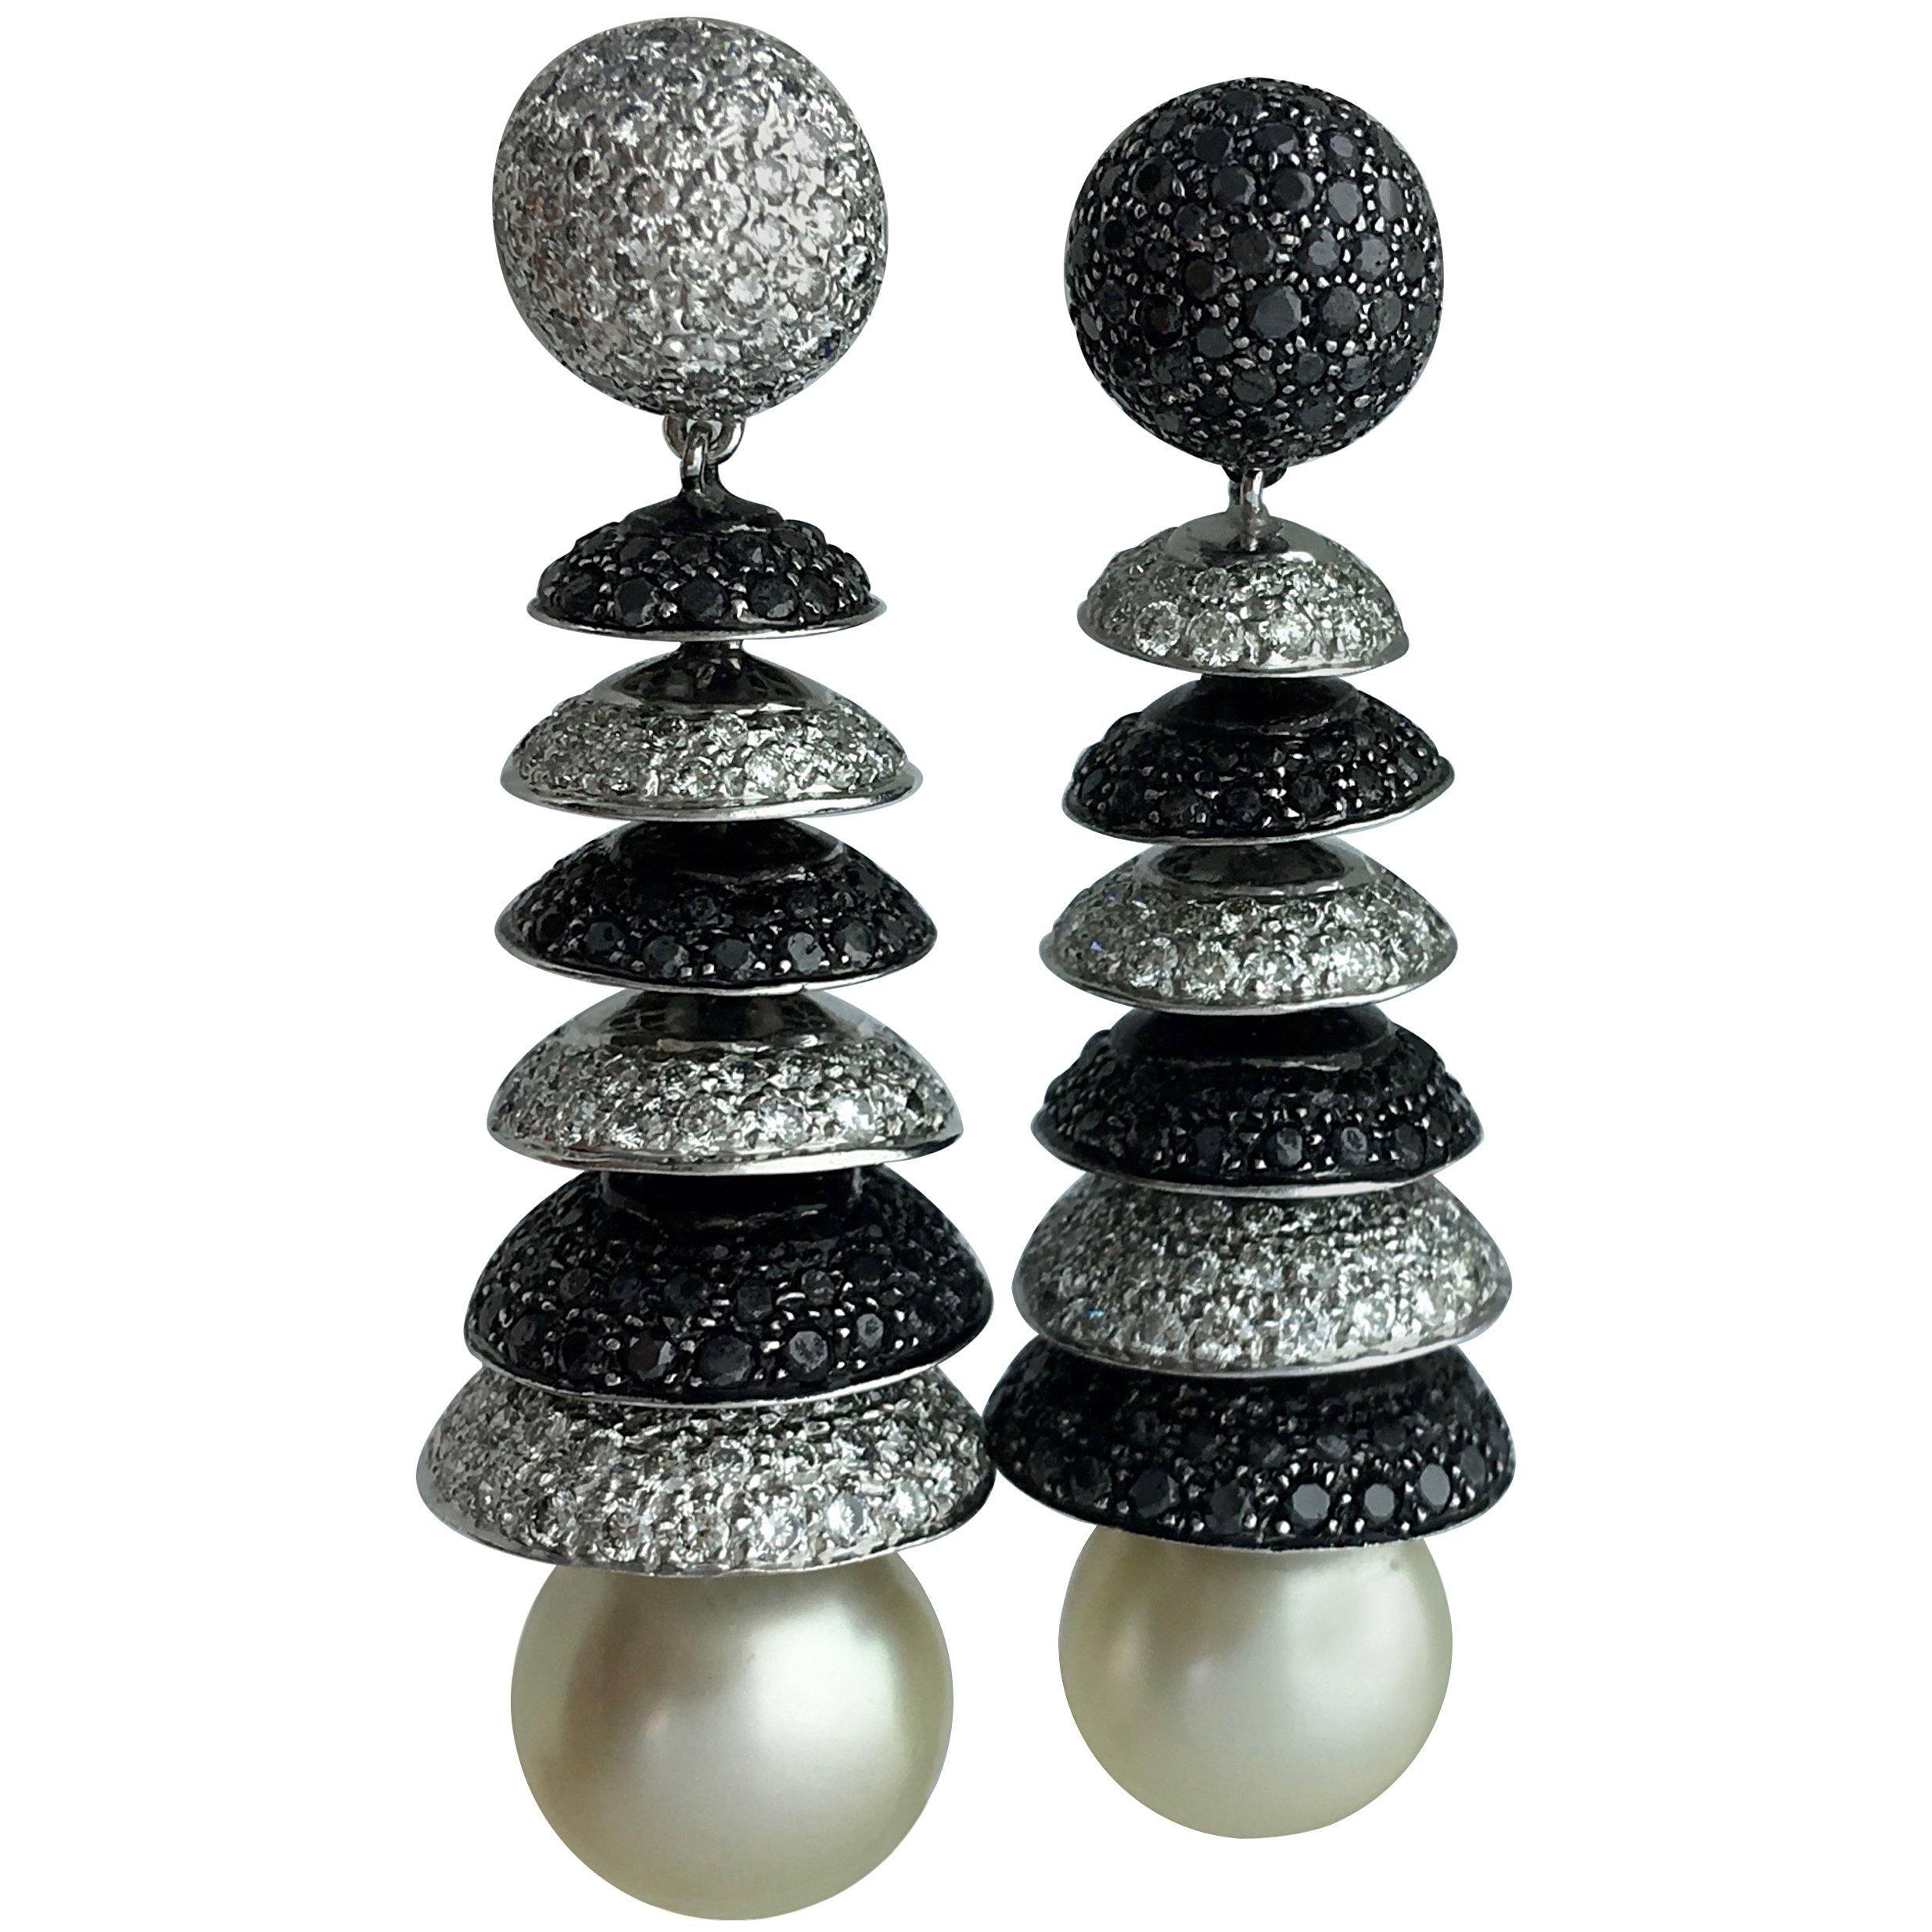 Black and White Diamond on Black and White Gold. Top contemporary design holding cultured Pearl.
 
Gross weight: 42.64 grams.